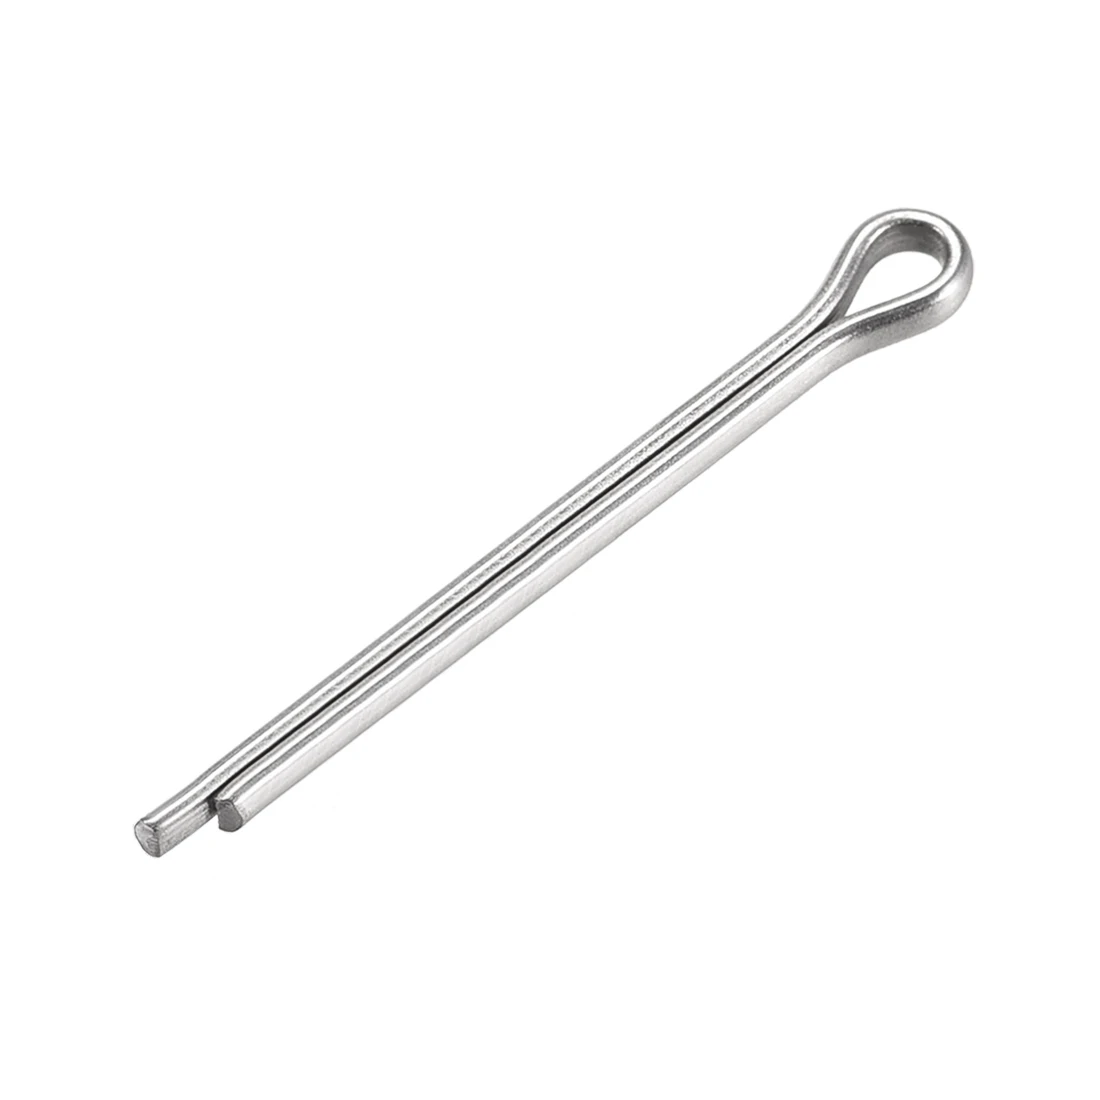 

uxcell 30Pcs Split Cotter Pin - 2.5mm x 30mm 304 Stainless Steel 2-Prongs Silver Tone for Home DIY Application